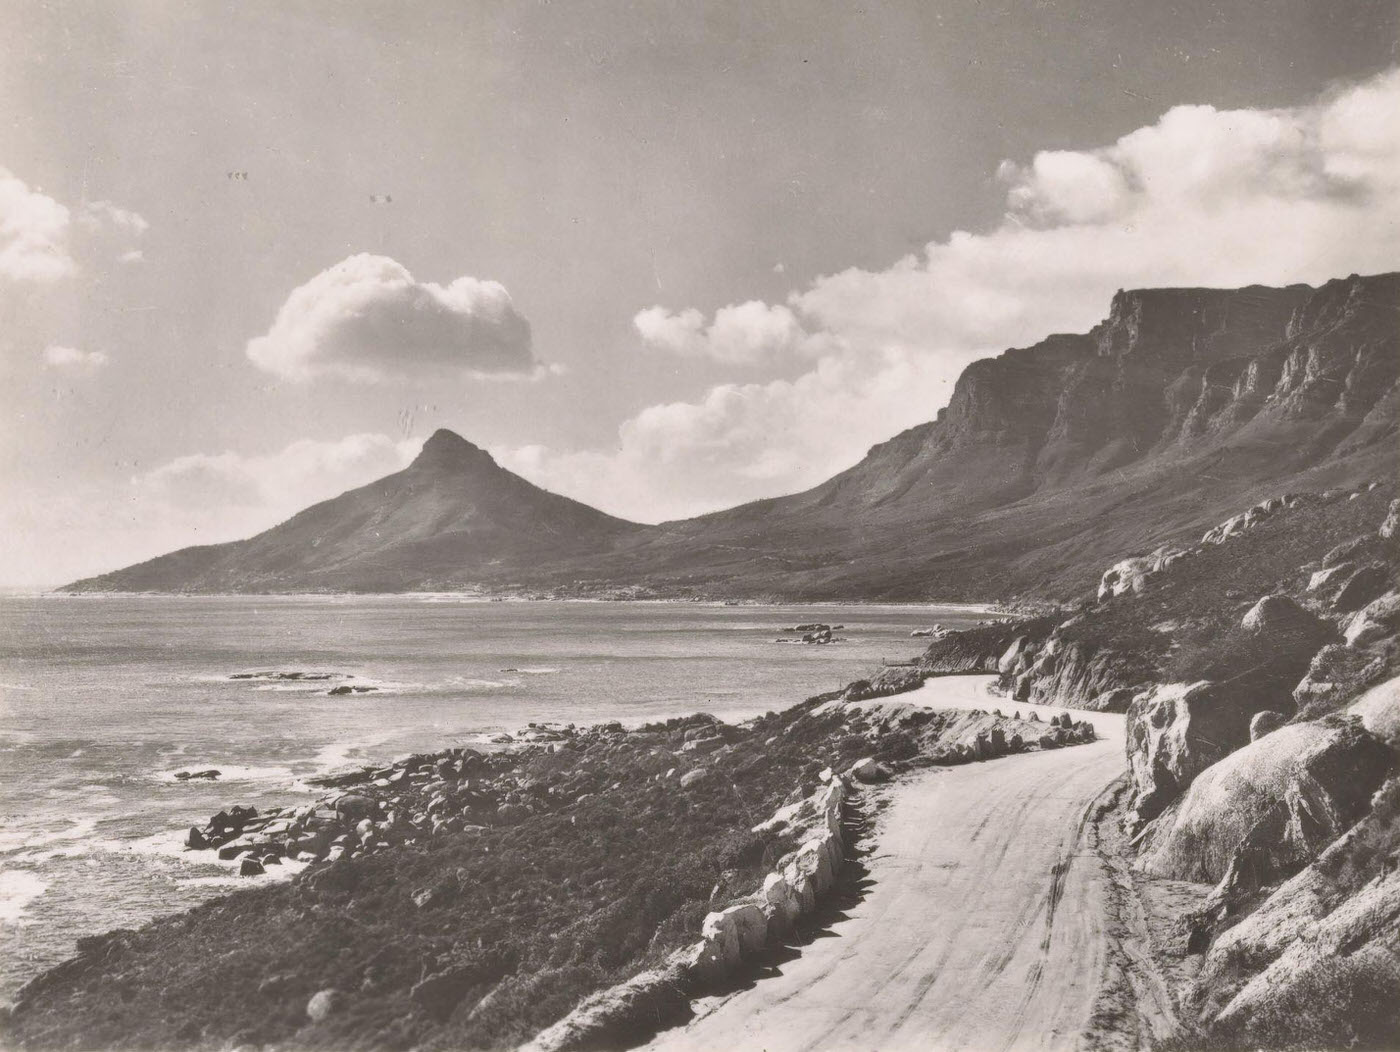 View of Table Mountain and Leeukop in Cape Town, 1940